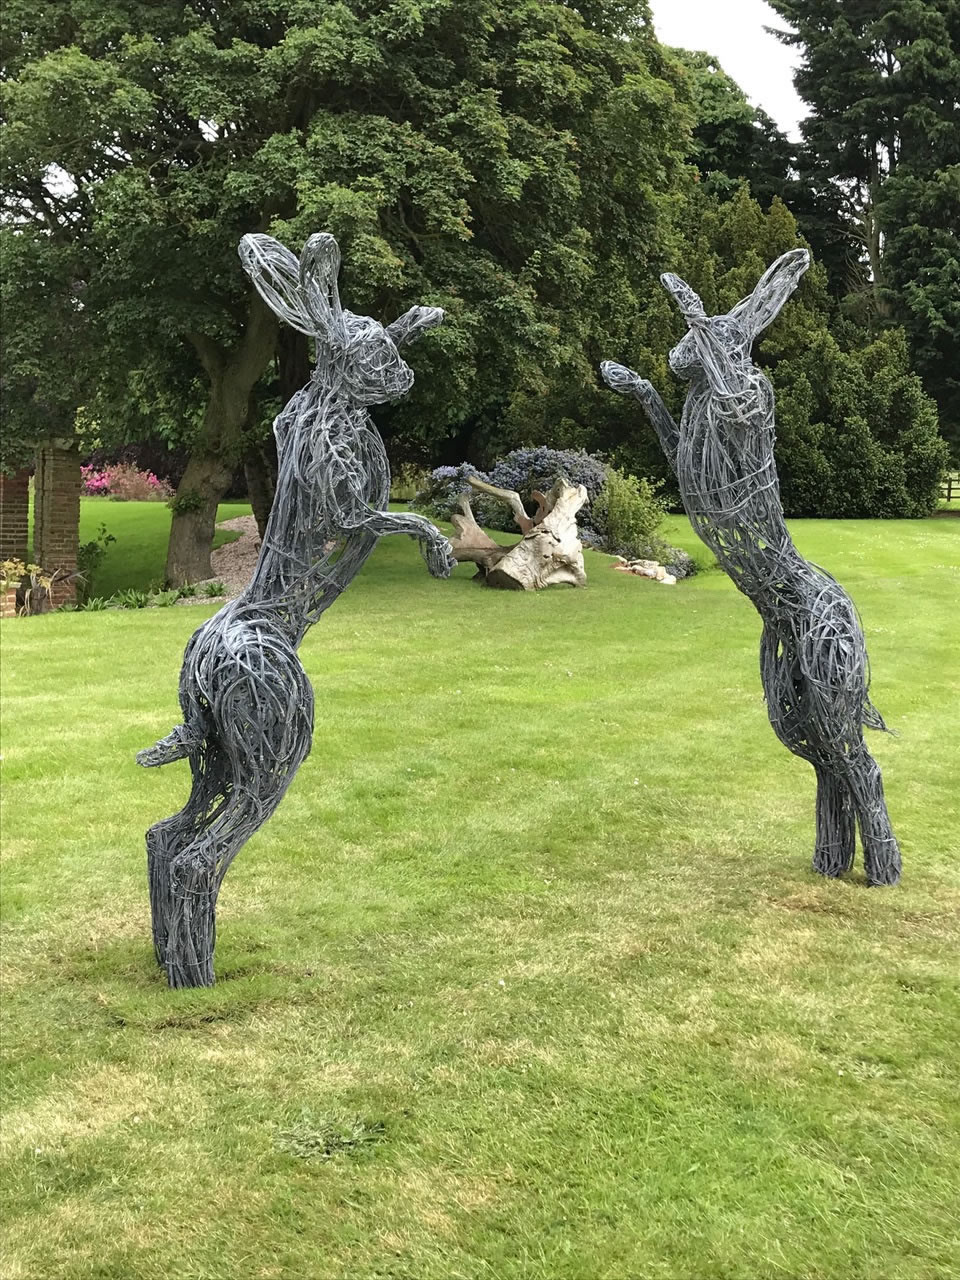 My 8 foot Chelsea Flower Show boxing hare wire sculptures installed in Norfolk were galvanised and etched to an aged finish